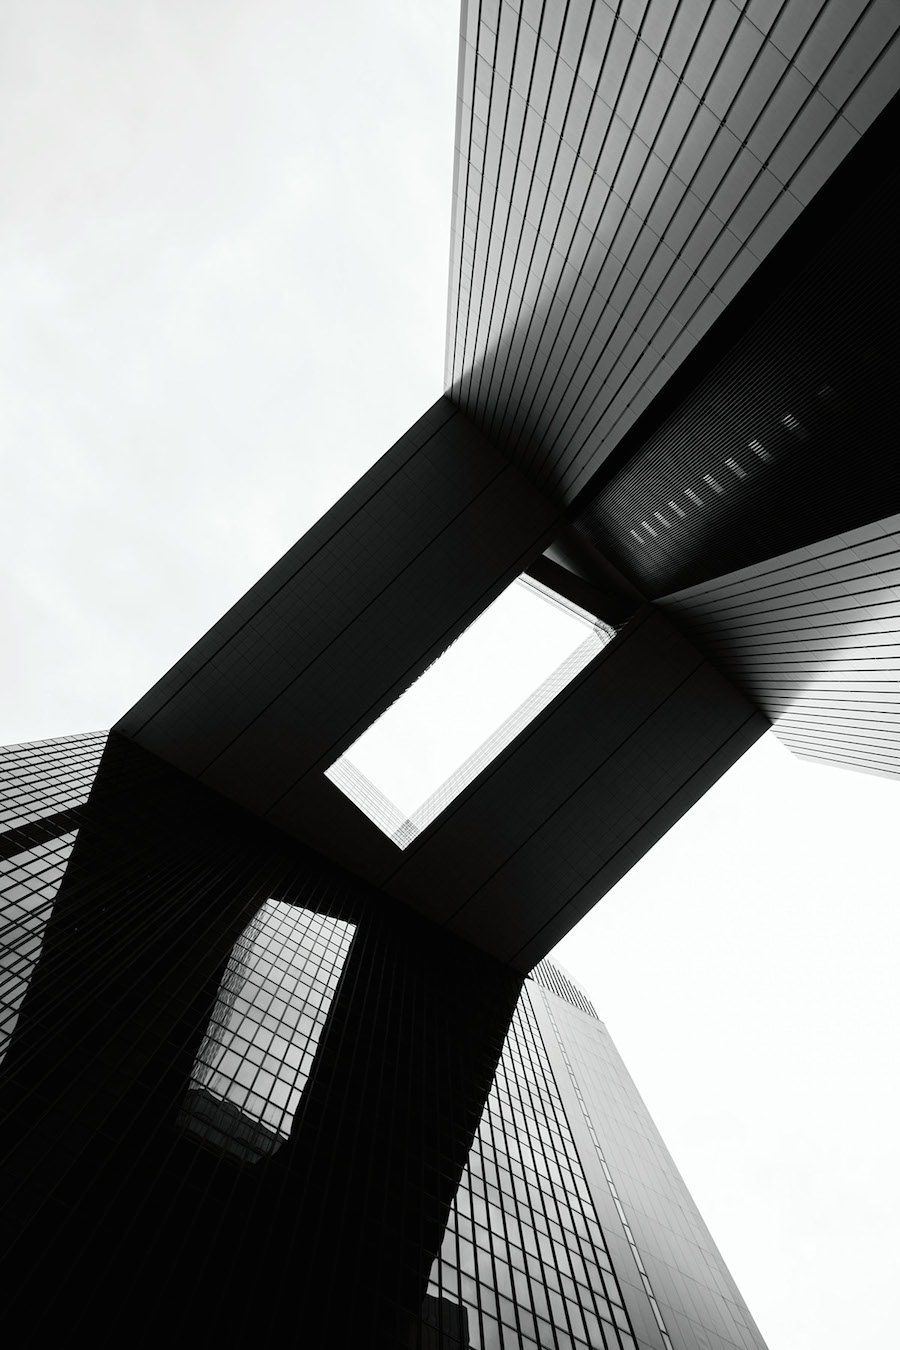 Uncluttered Black and White Architecture Photography-14